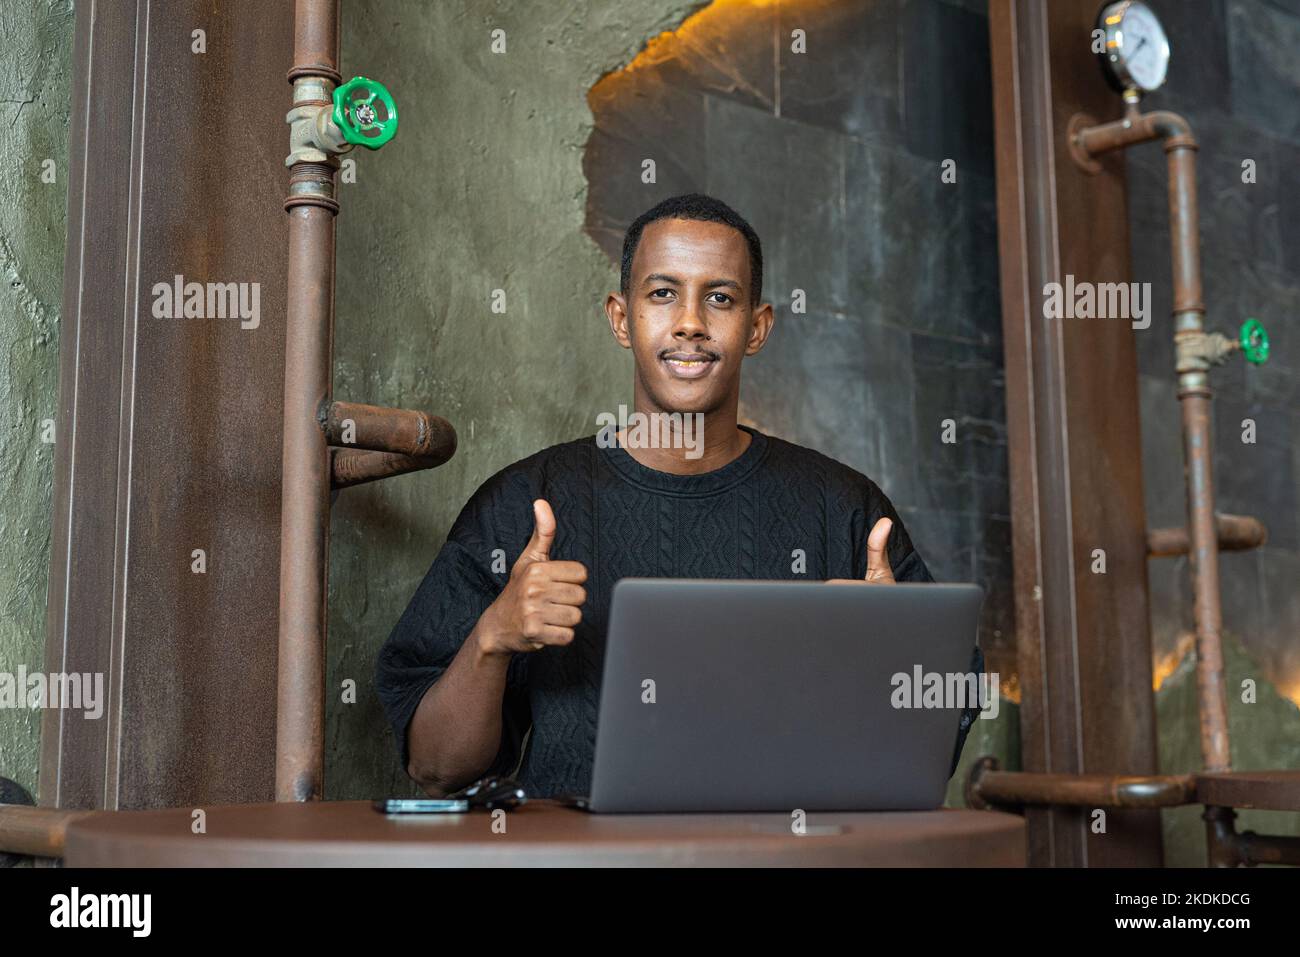 Portrait of handsome black man sitting and using laptop computer indoors Stock Photo